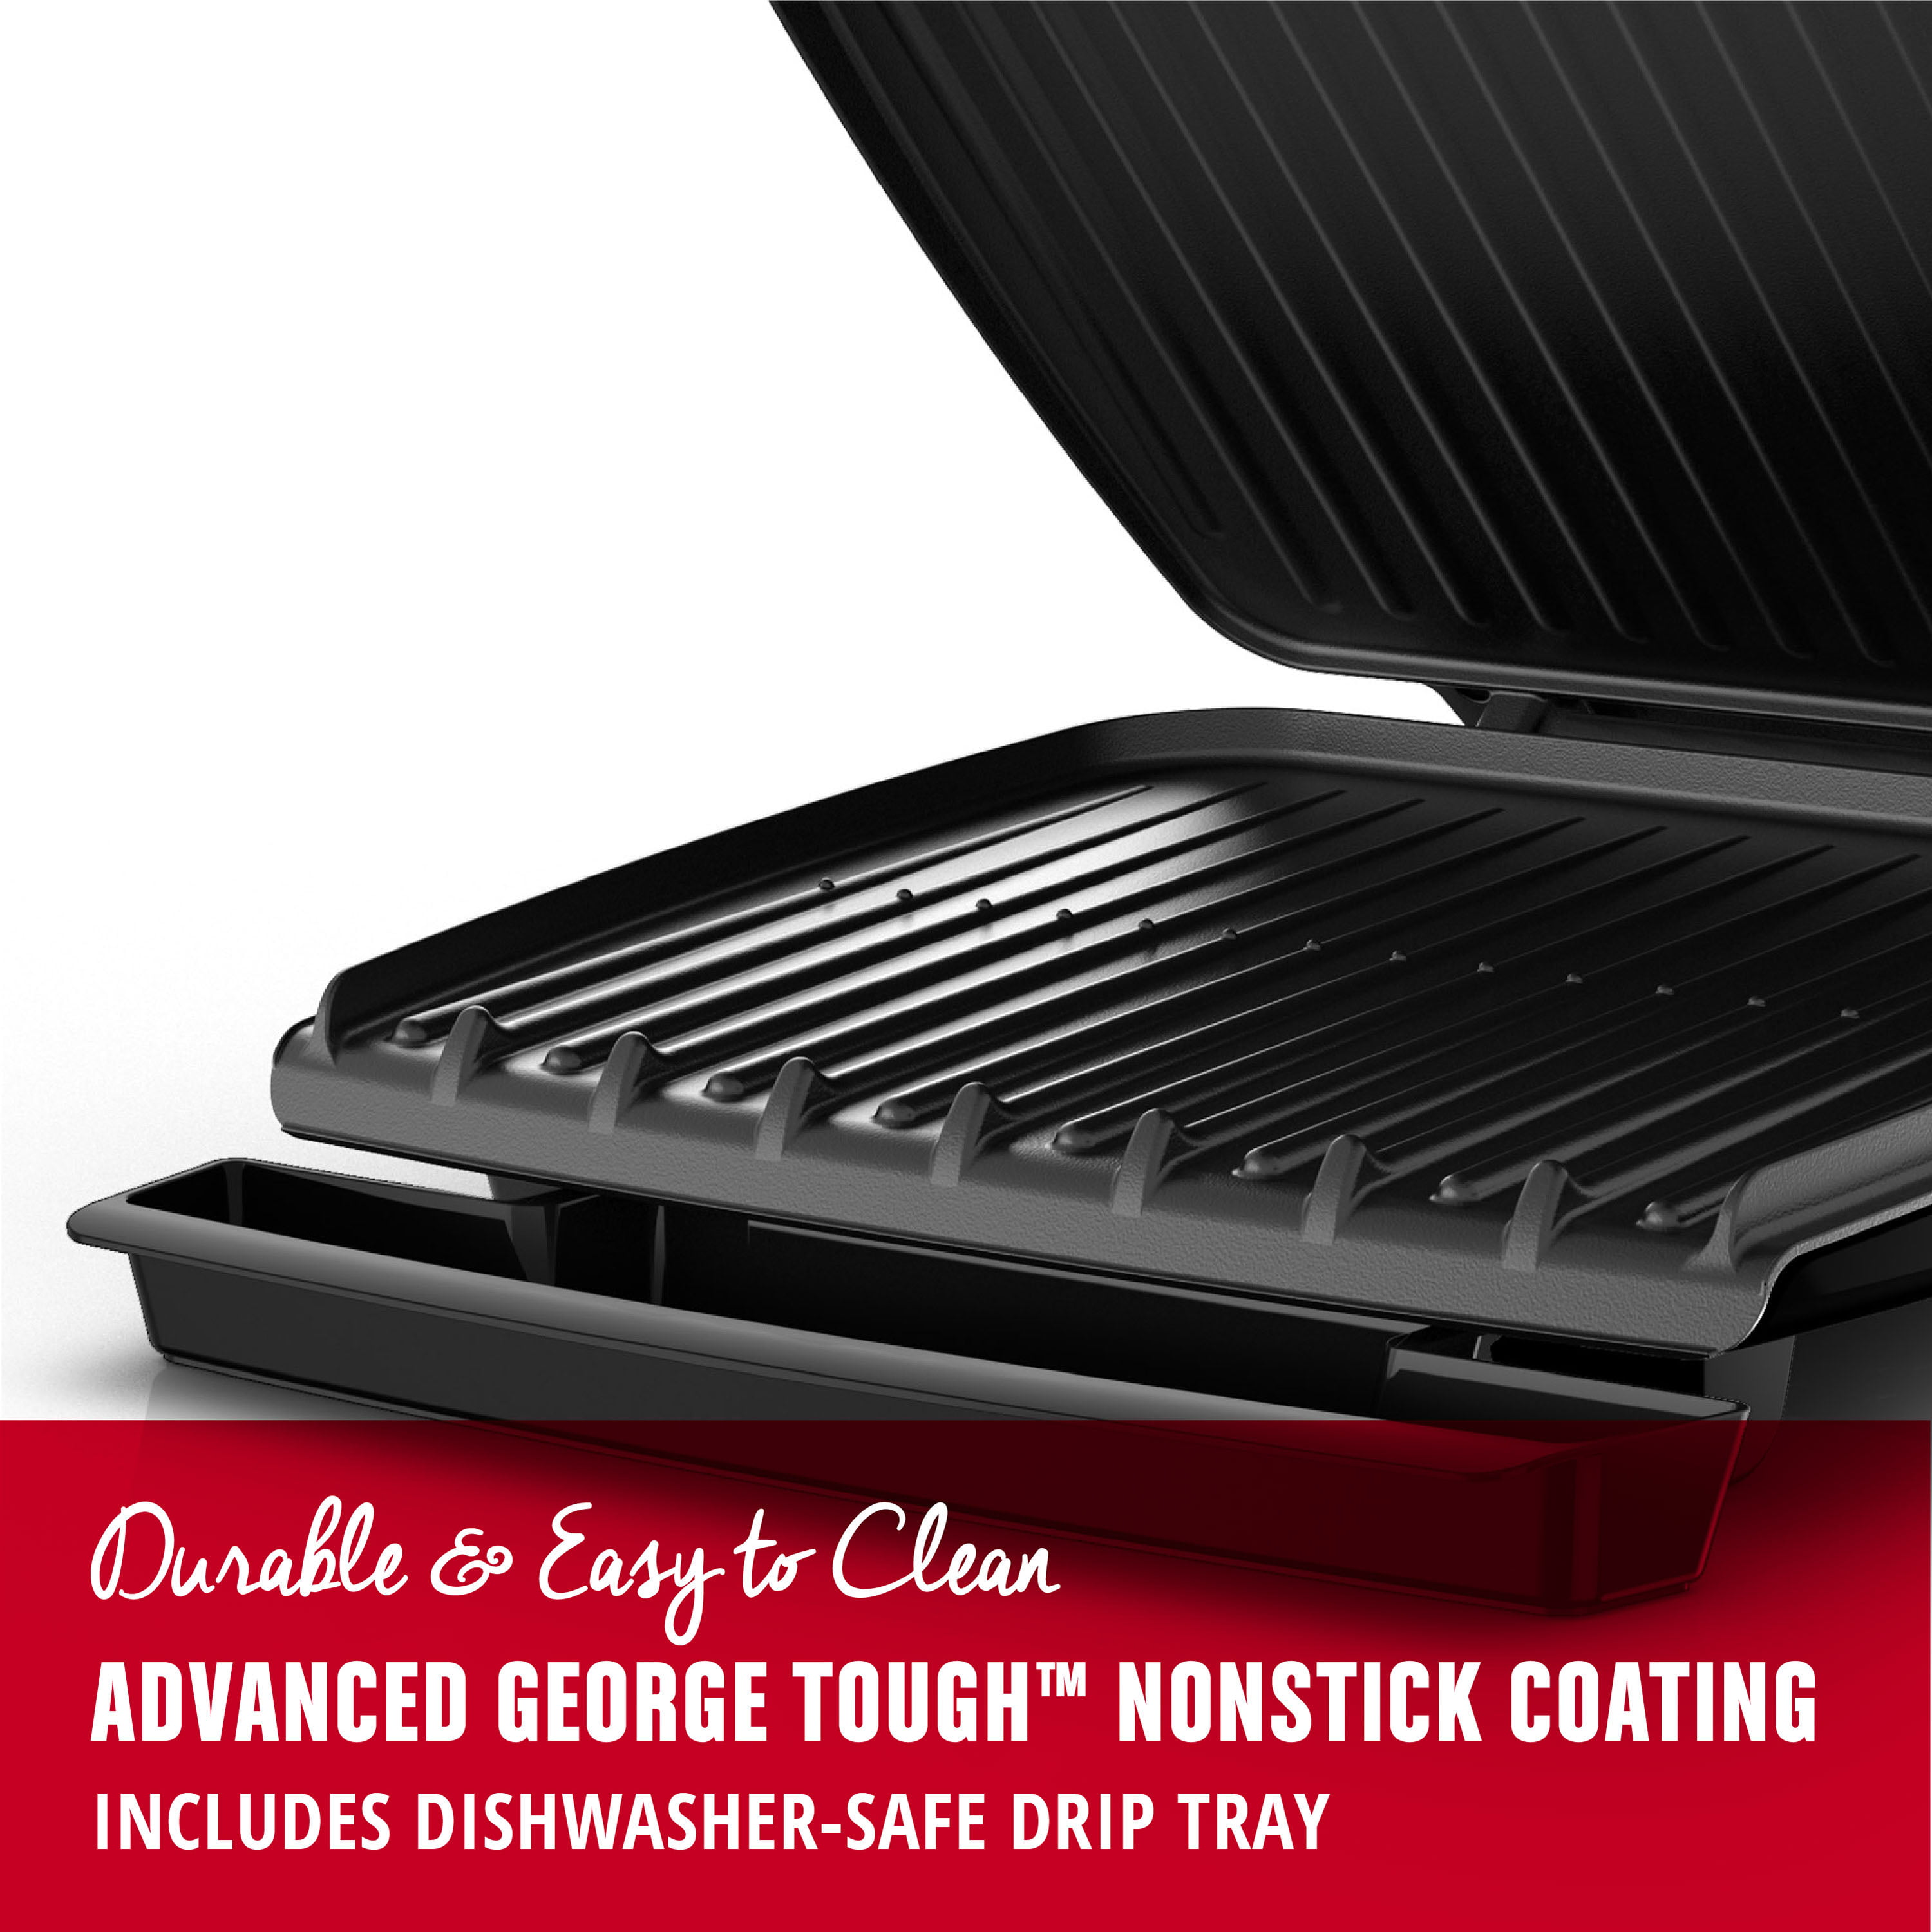  George Foreman GR36CB Jumbo Size Plus Grill with